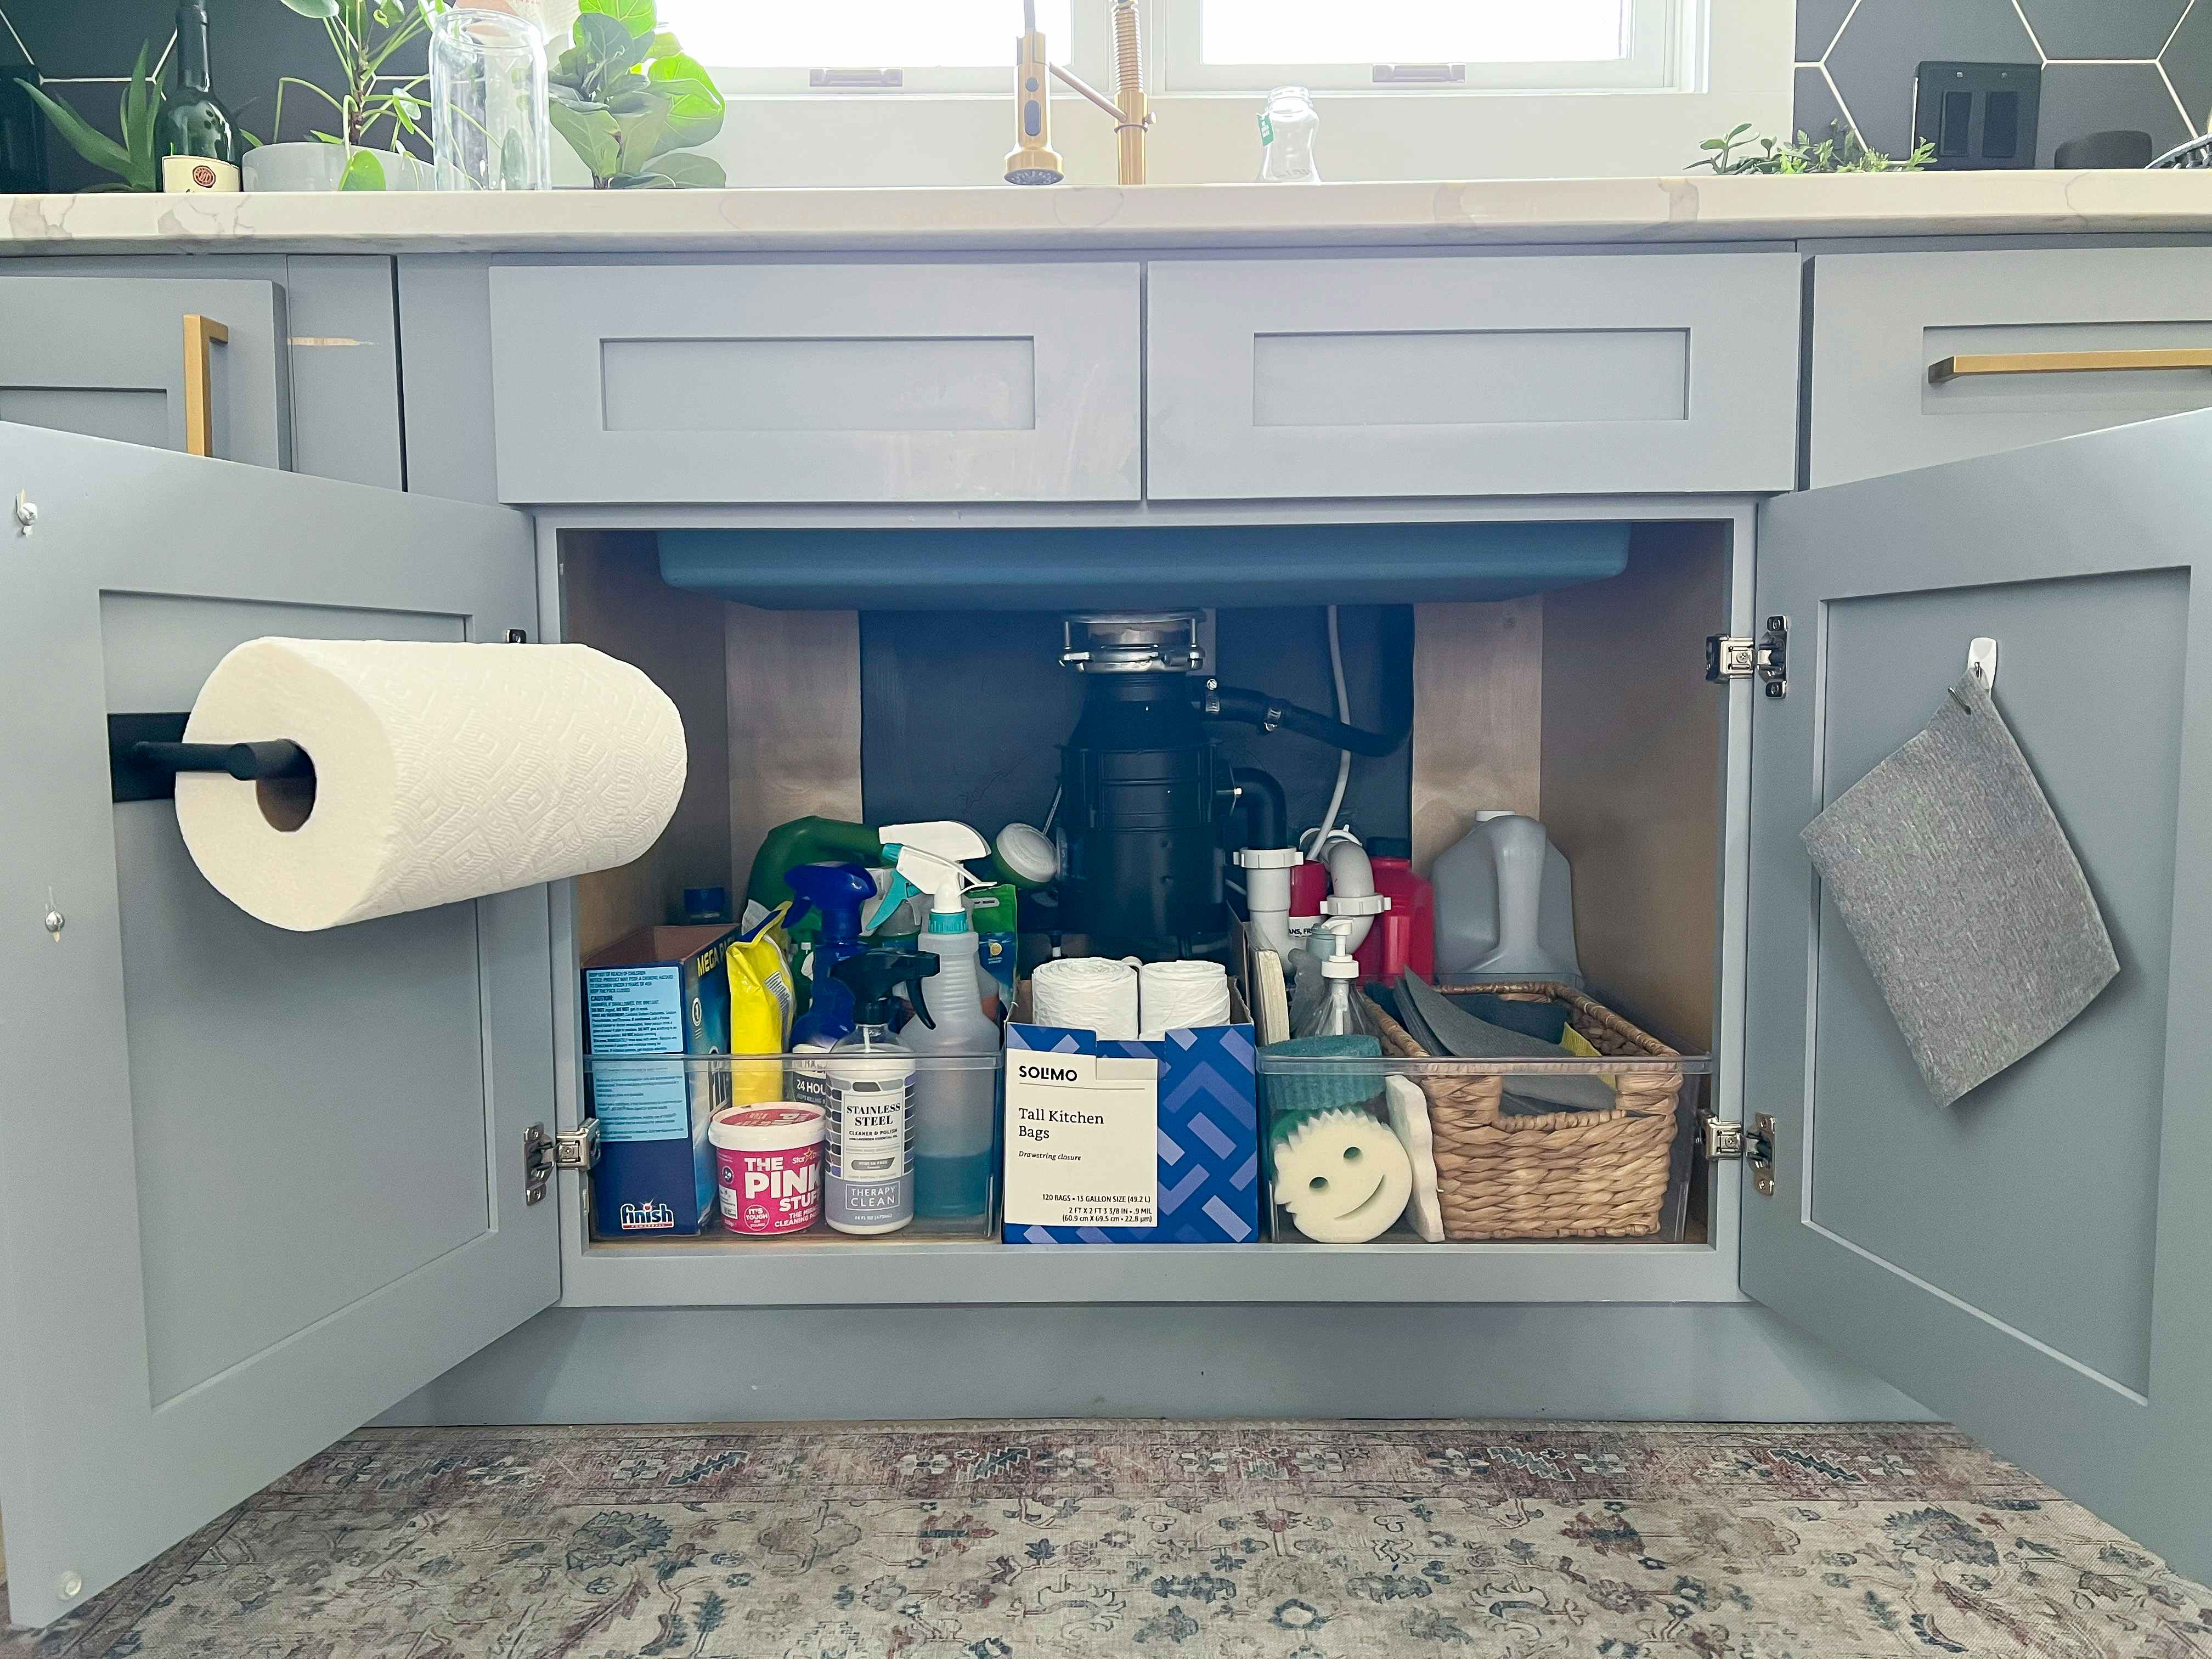 cupboard under the sink open with paper towel on paper towel holder, cleaning supplies and washcloth